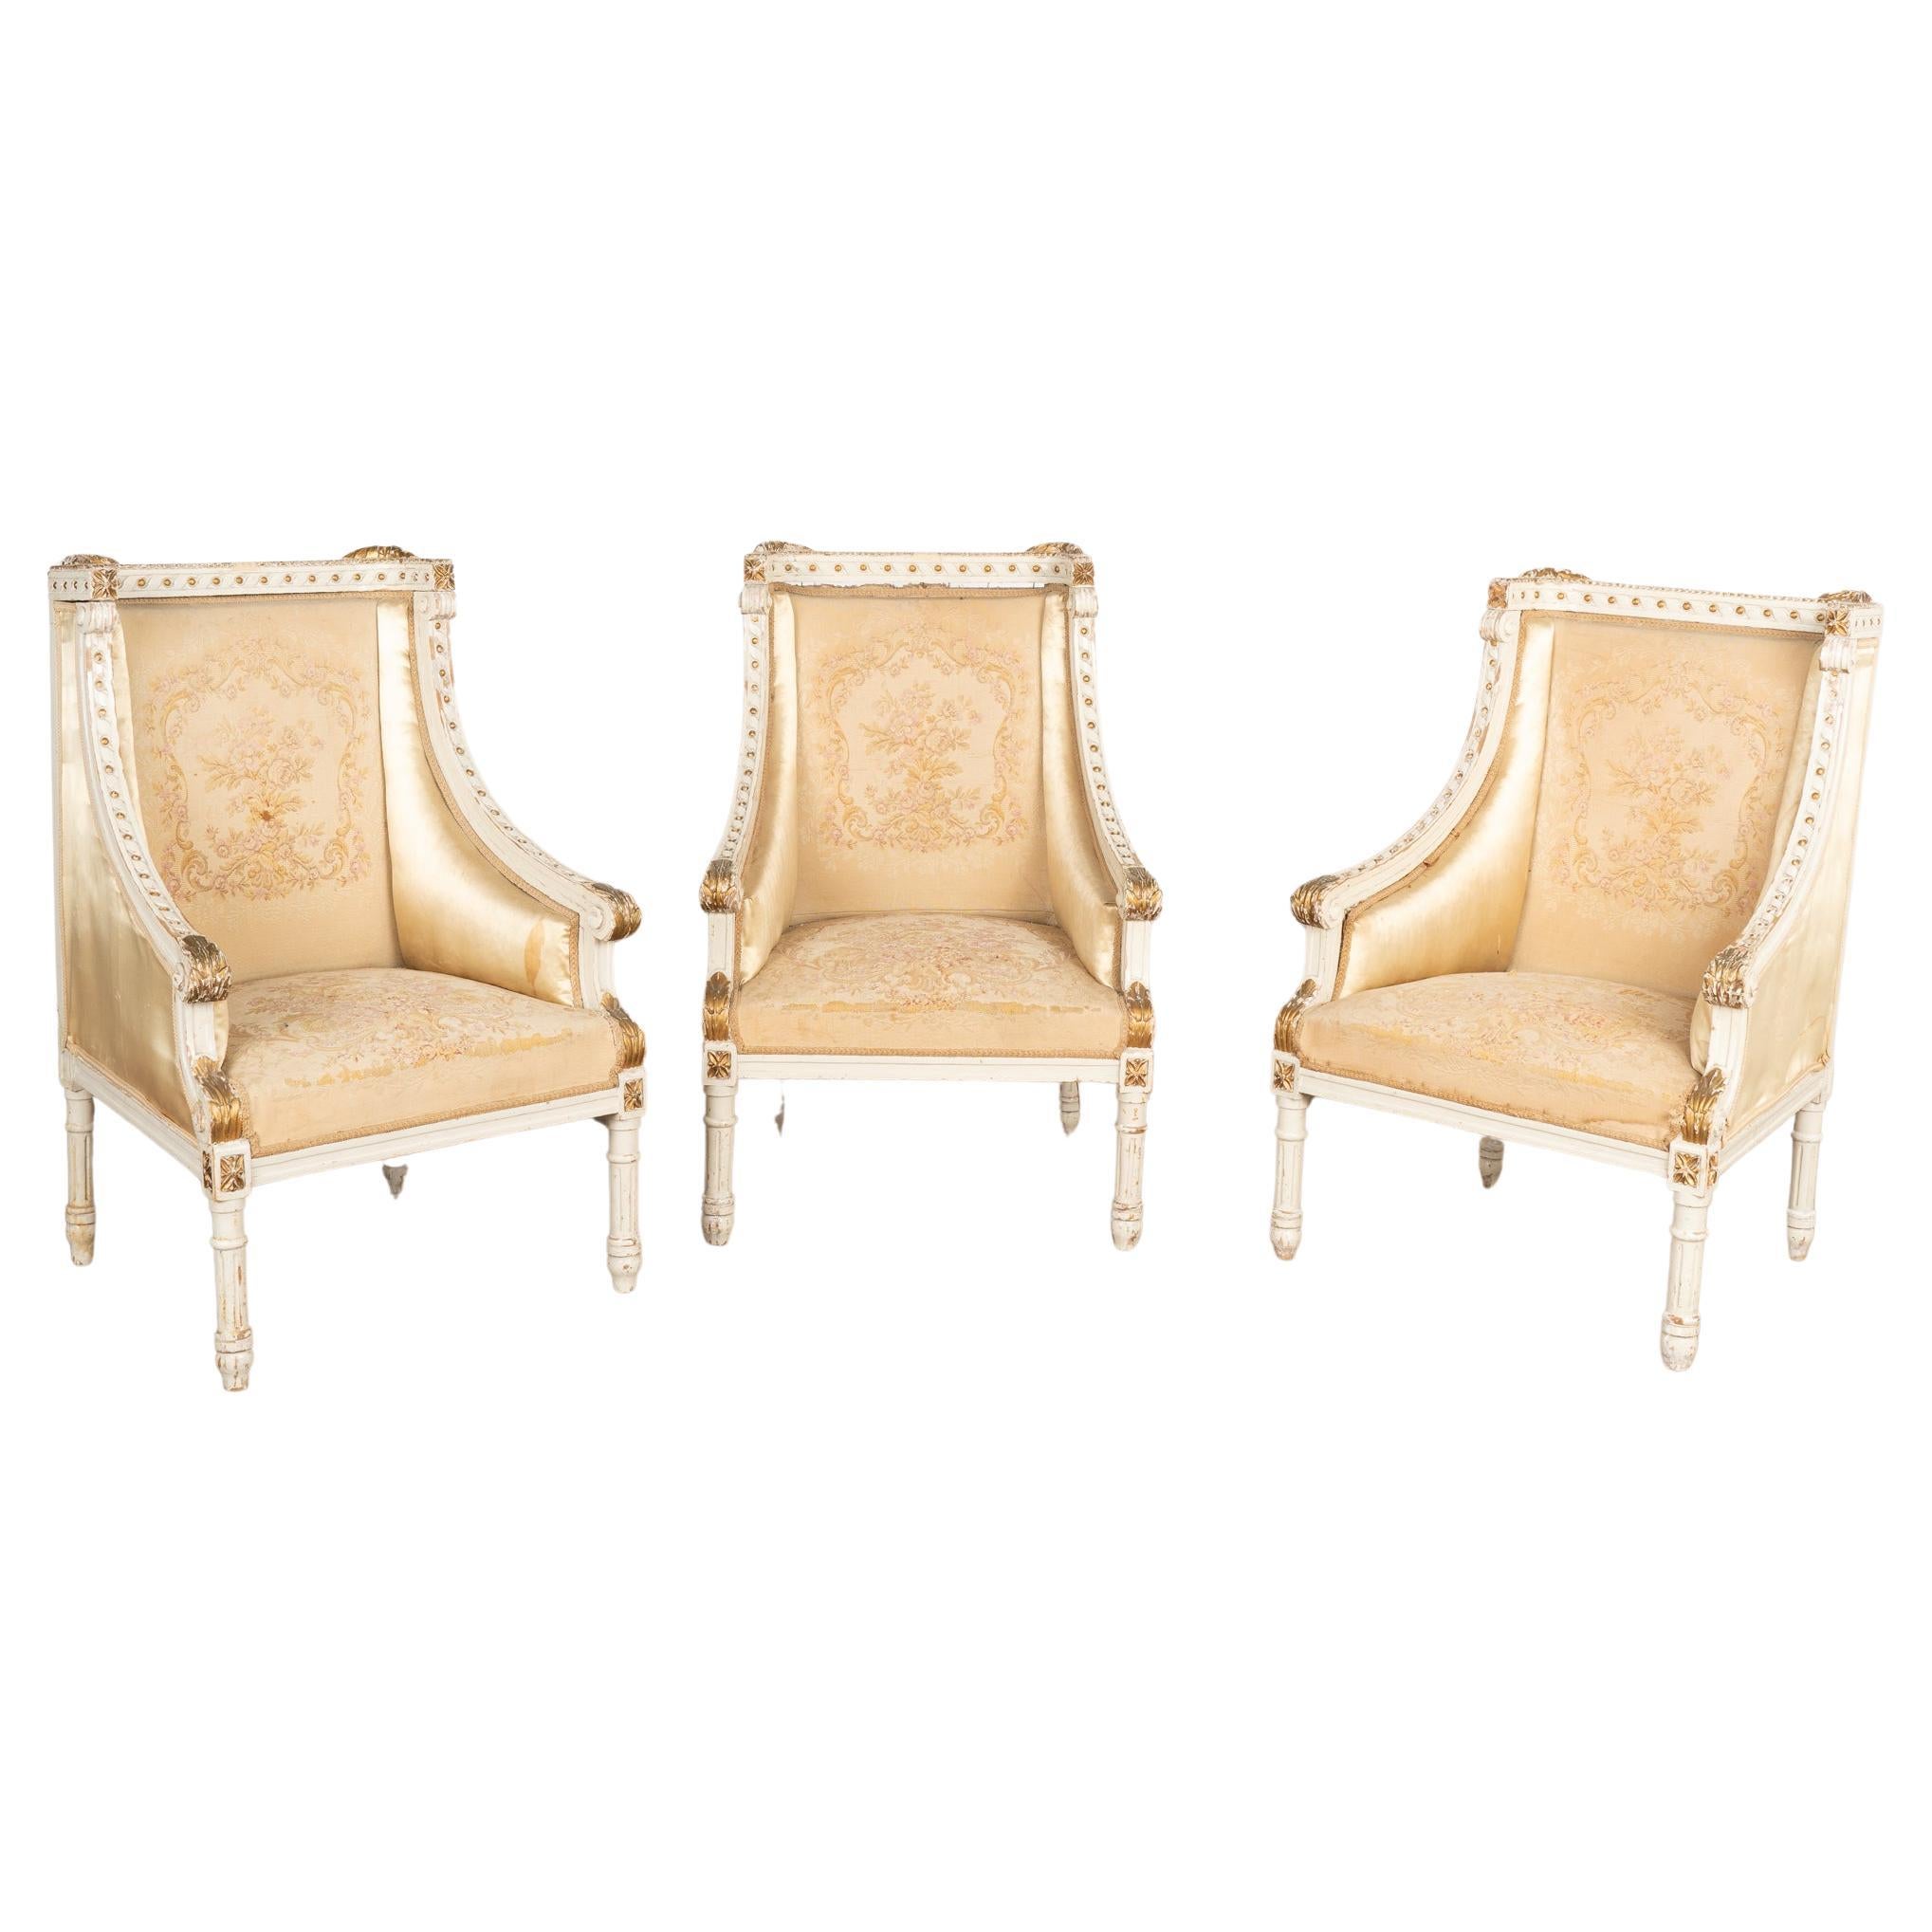 Set of Three White and Gold Arm Chairs, France circa 1890